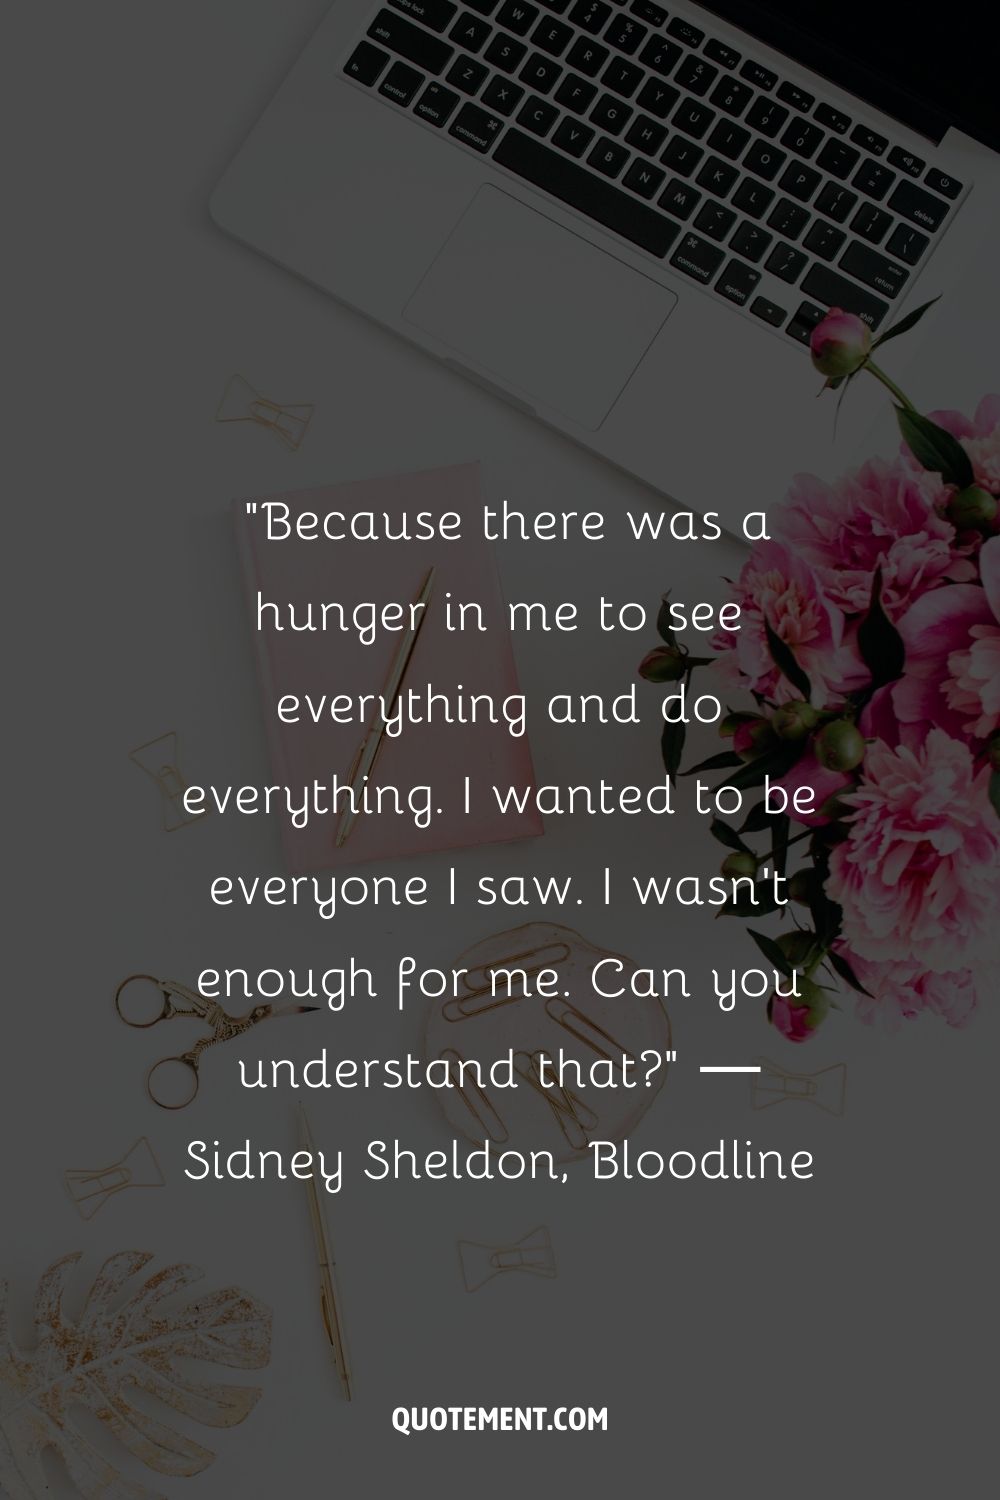 “Because there was a hunger in me to see everything and do everything. I wanted to be everyone I saw